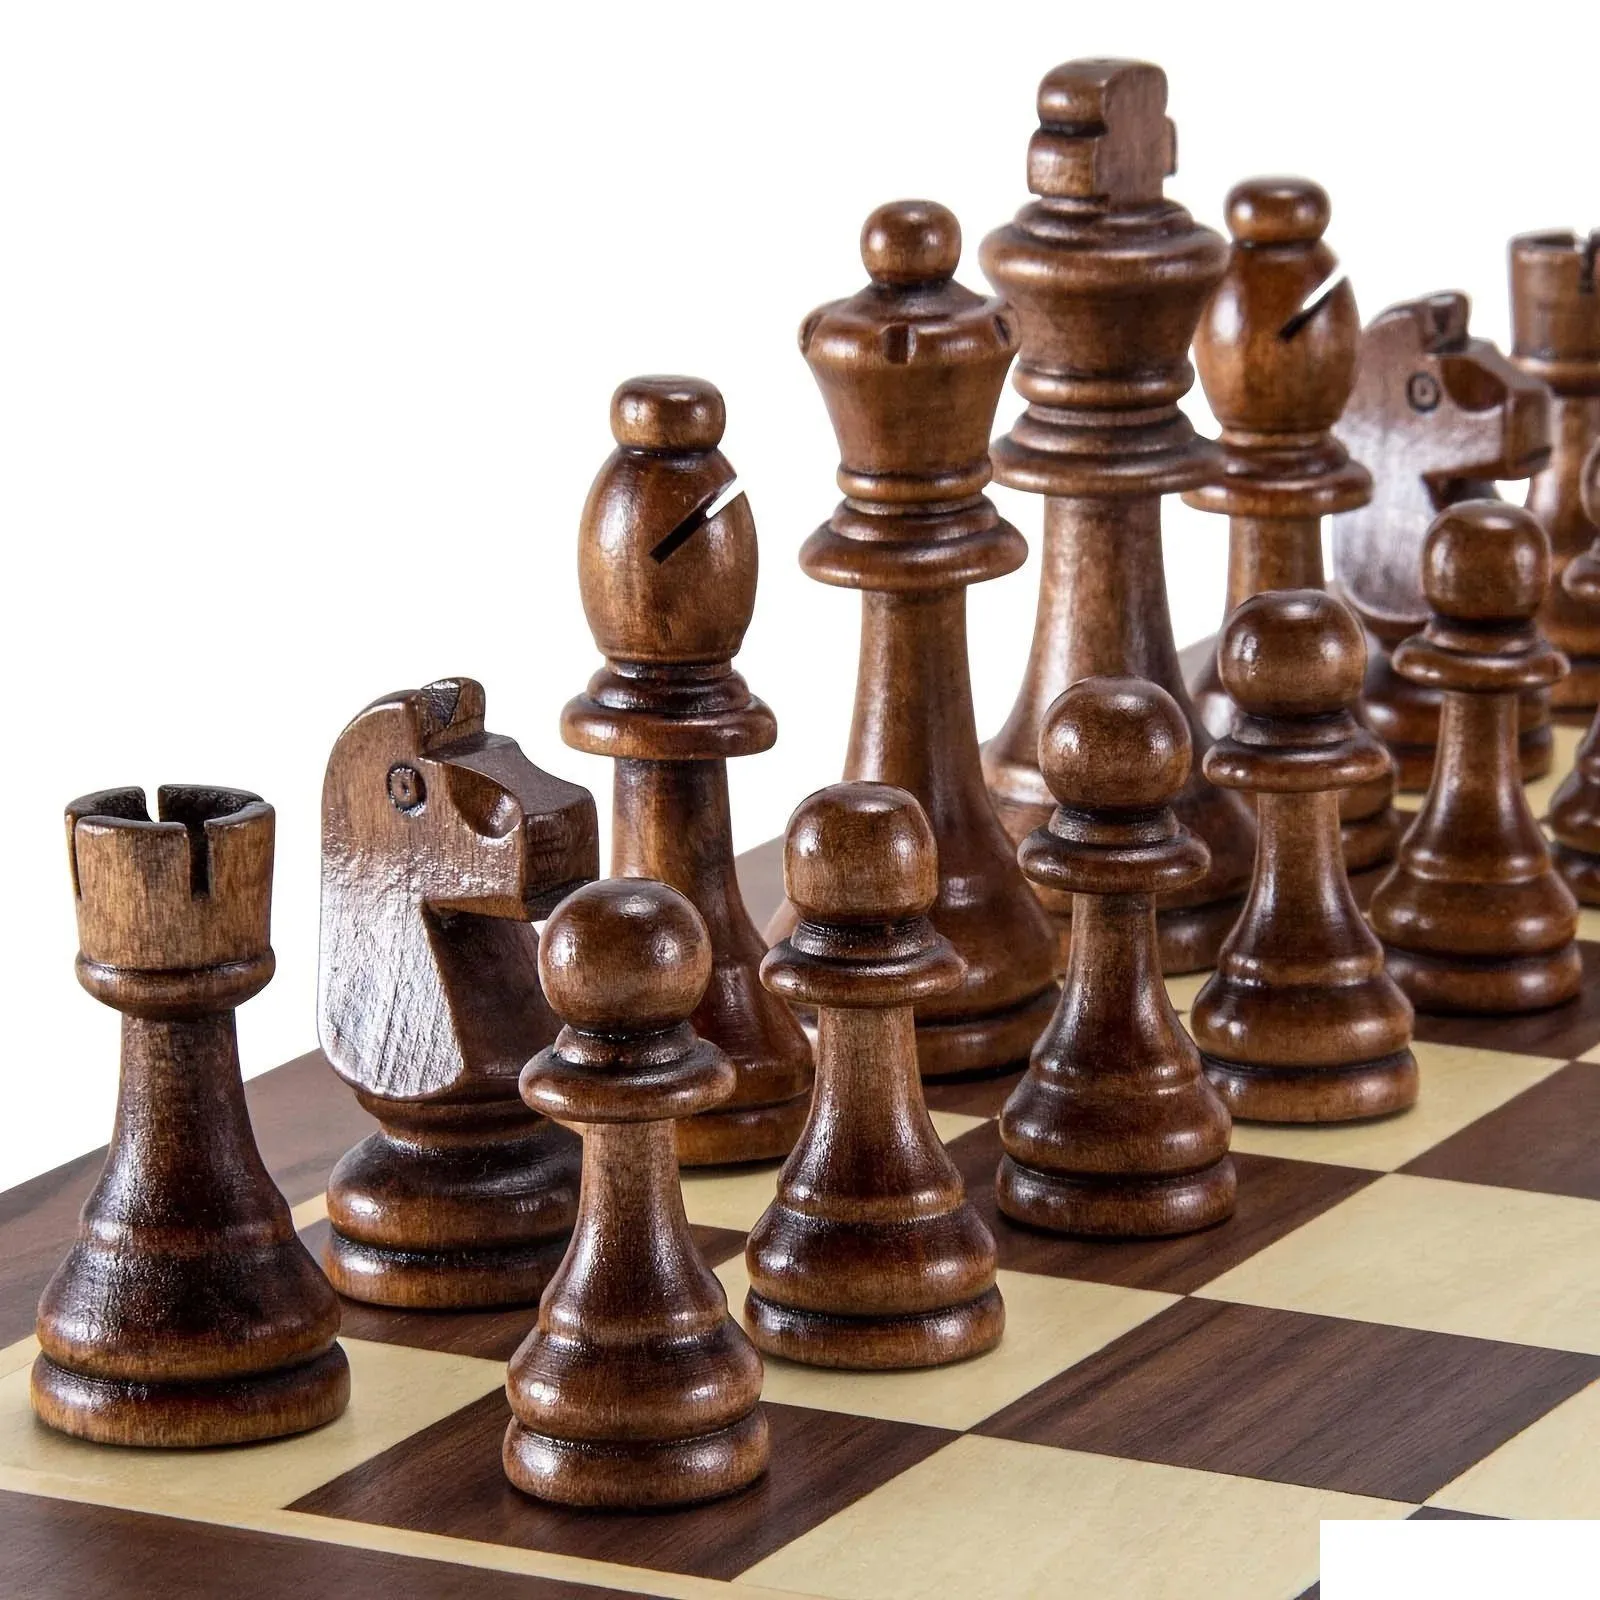 Chess Games 32 Pieses Wooden Standard Tournamen Staunton Wood Chessmen 8Cm King Heightchess Pieces Only No Board 231031 Drop Delivery Ot89P